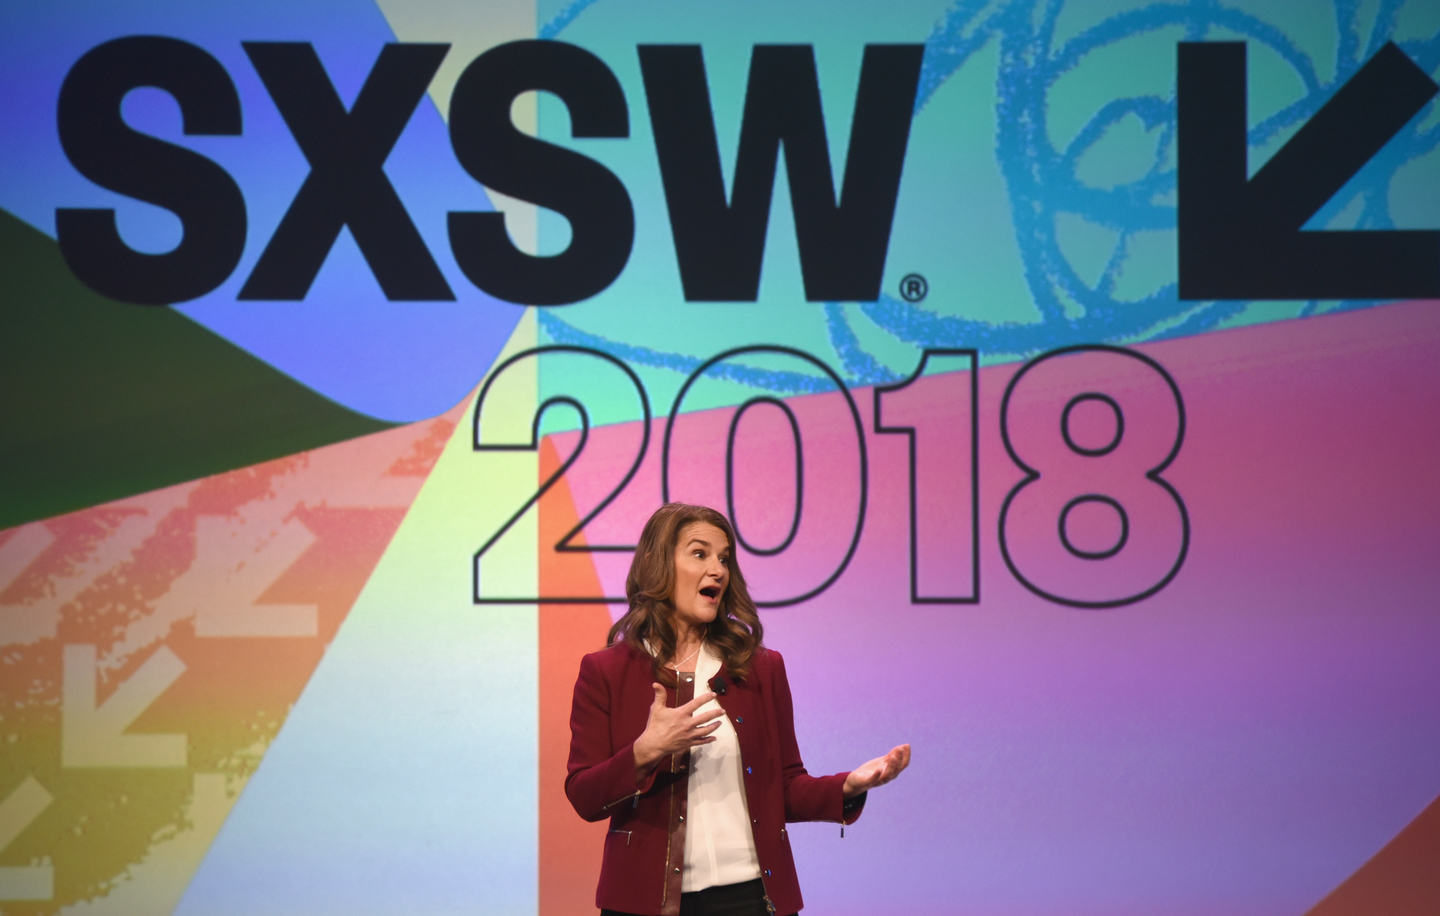 SXSW Interactive Keynote: Melinda Gates. Photo by Dave Pedley/Getty Images for SXSW